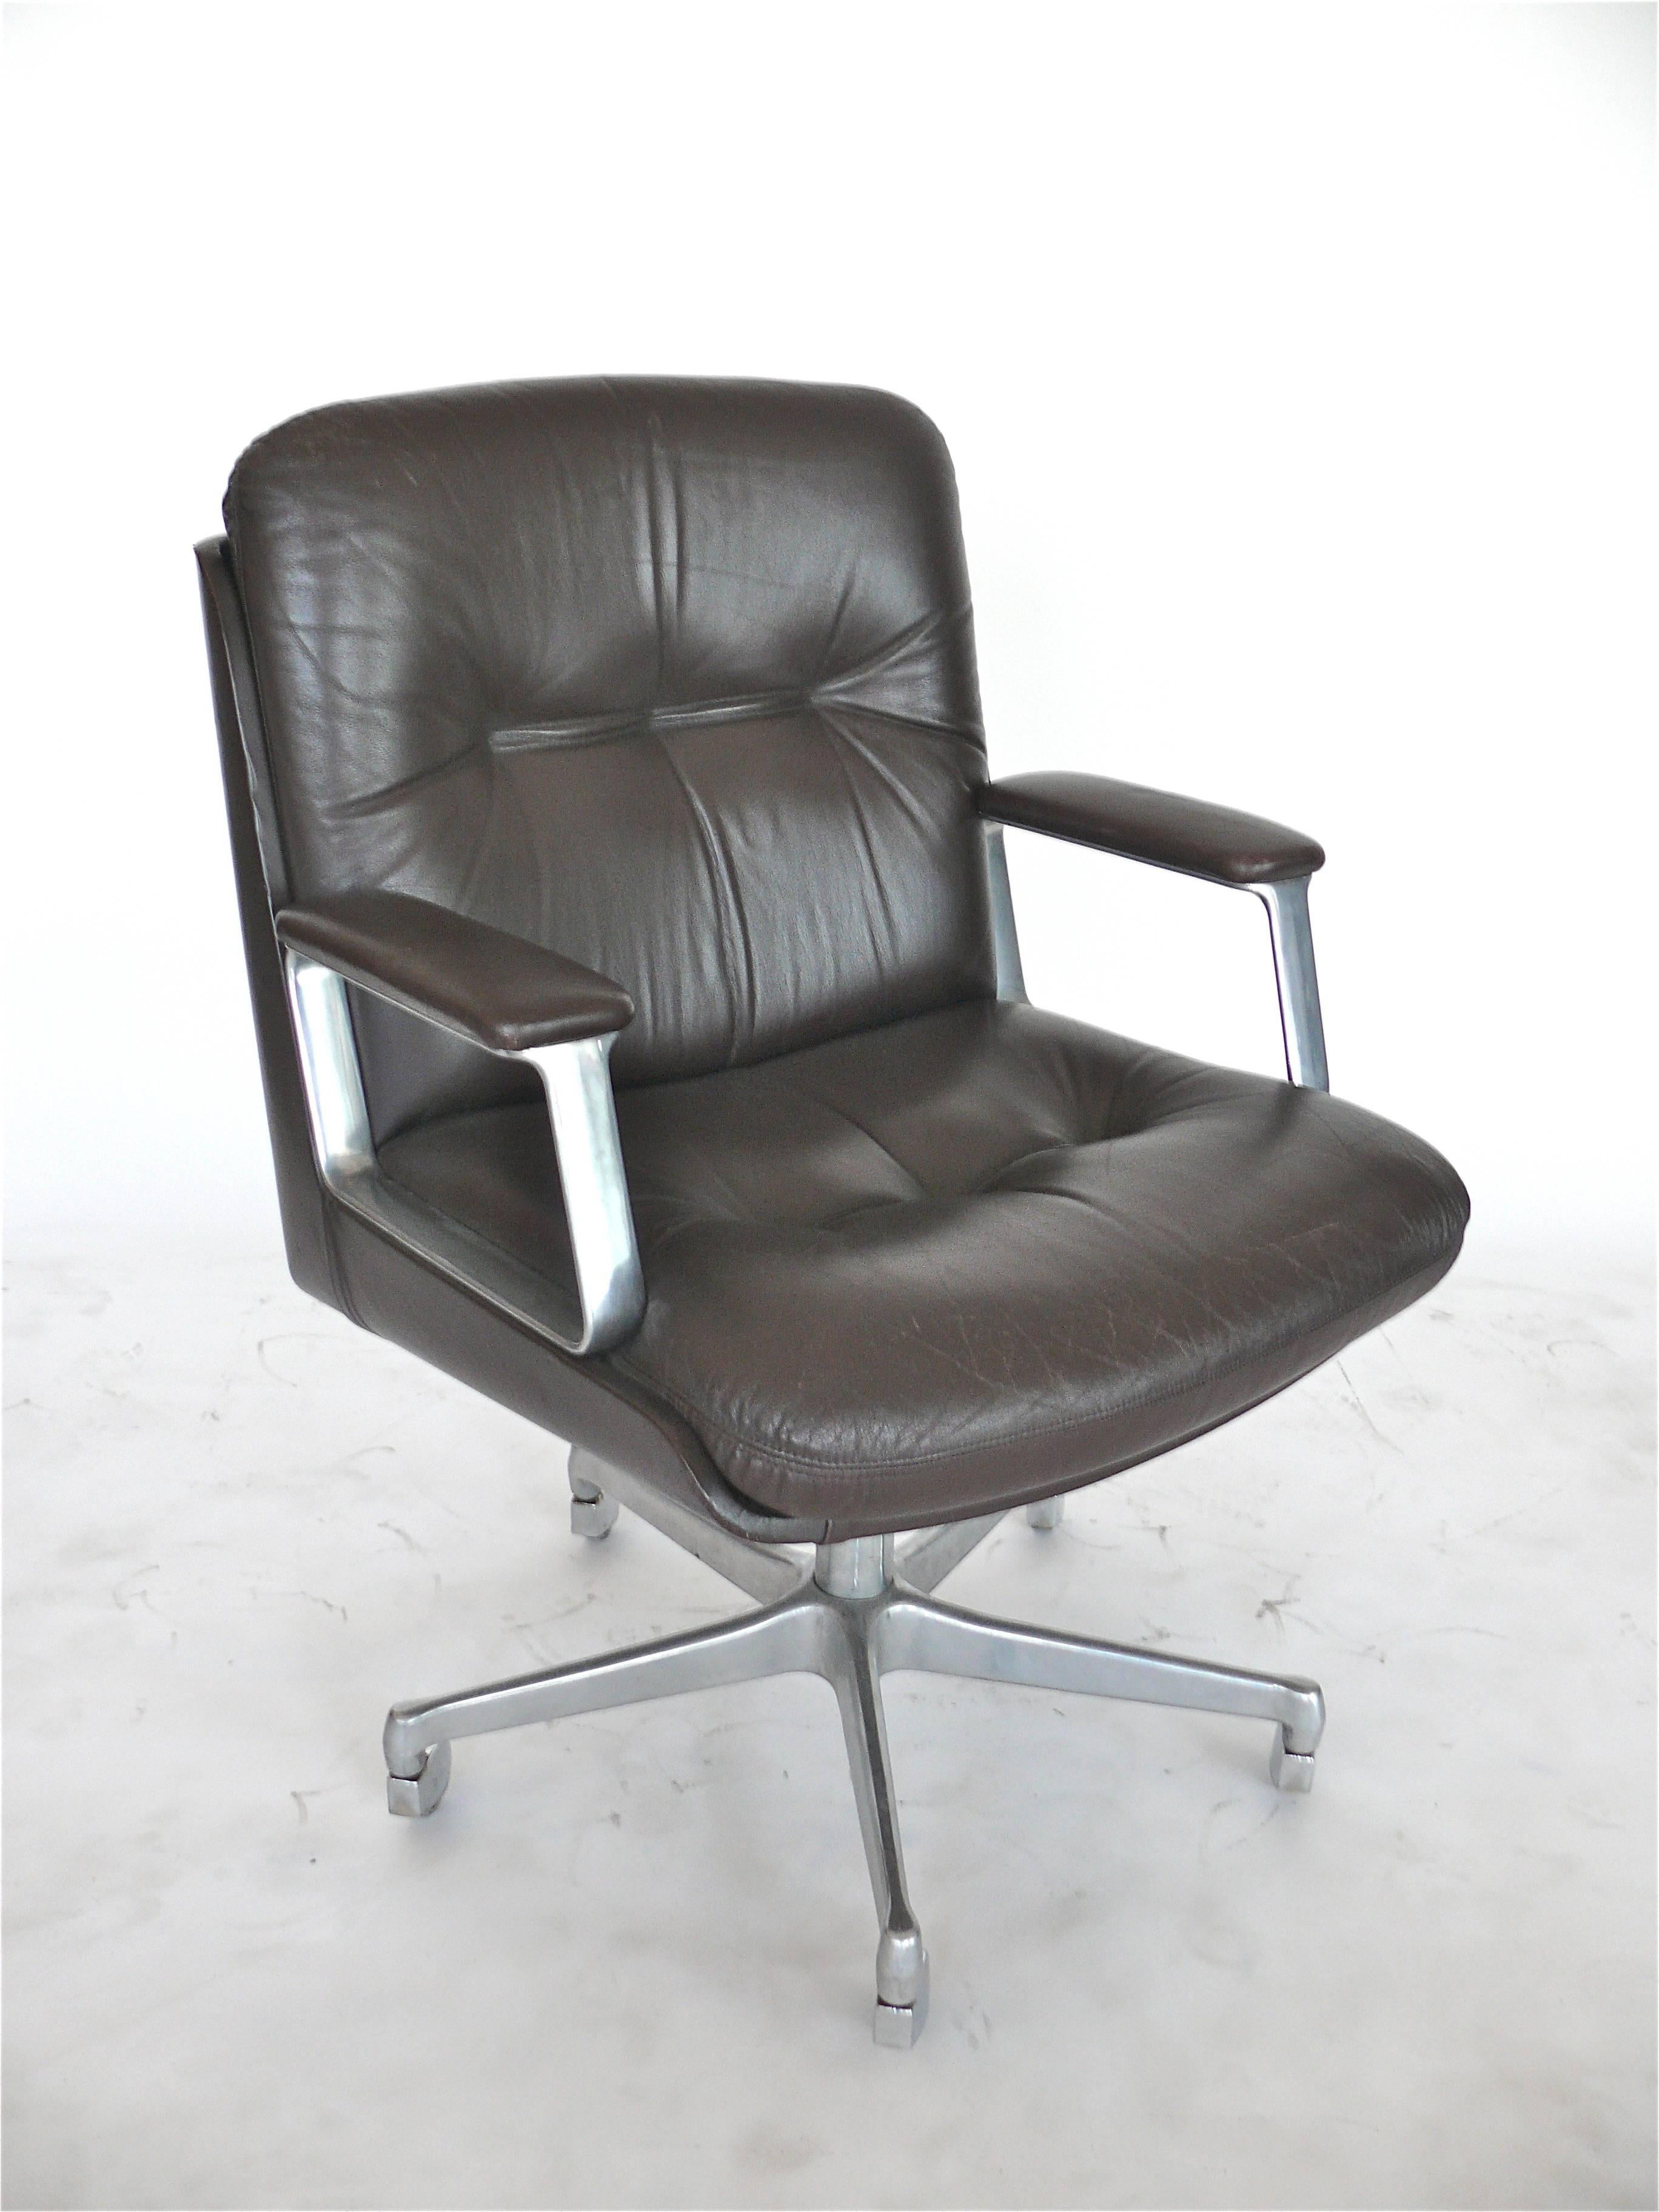 Great Italian leather office chair in the style of Osvaldo Borsani with 5 star aluminum base on original casters. Upholstered in dark chocolate brown leather that is in excellent condition. Chair swivel, tilt and can be adjusted in height. Extremely